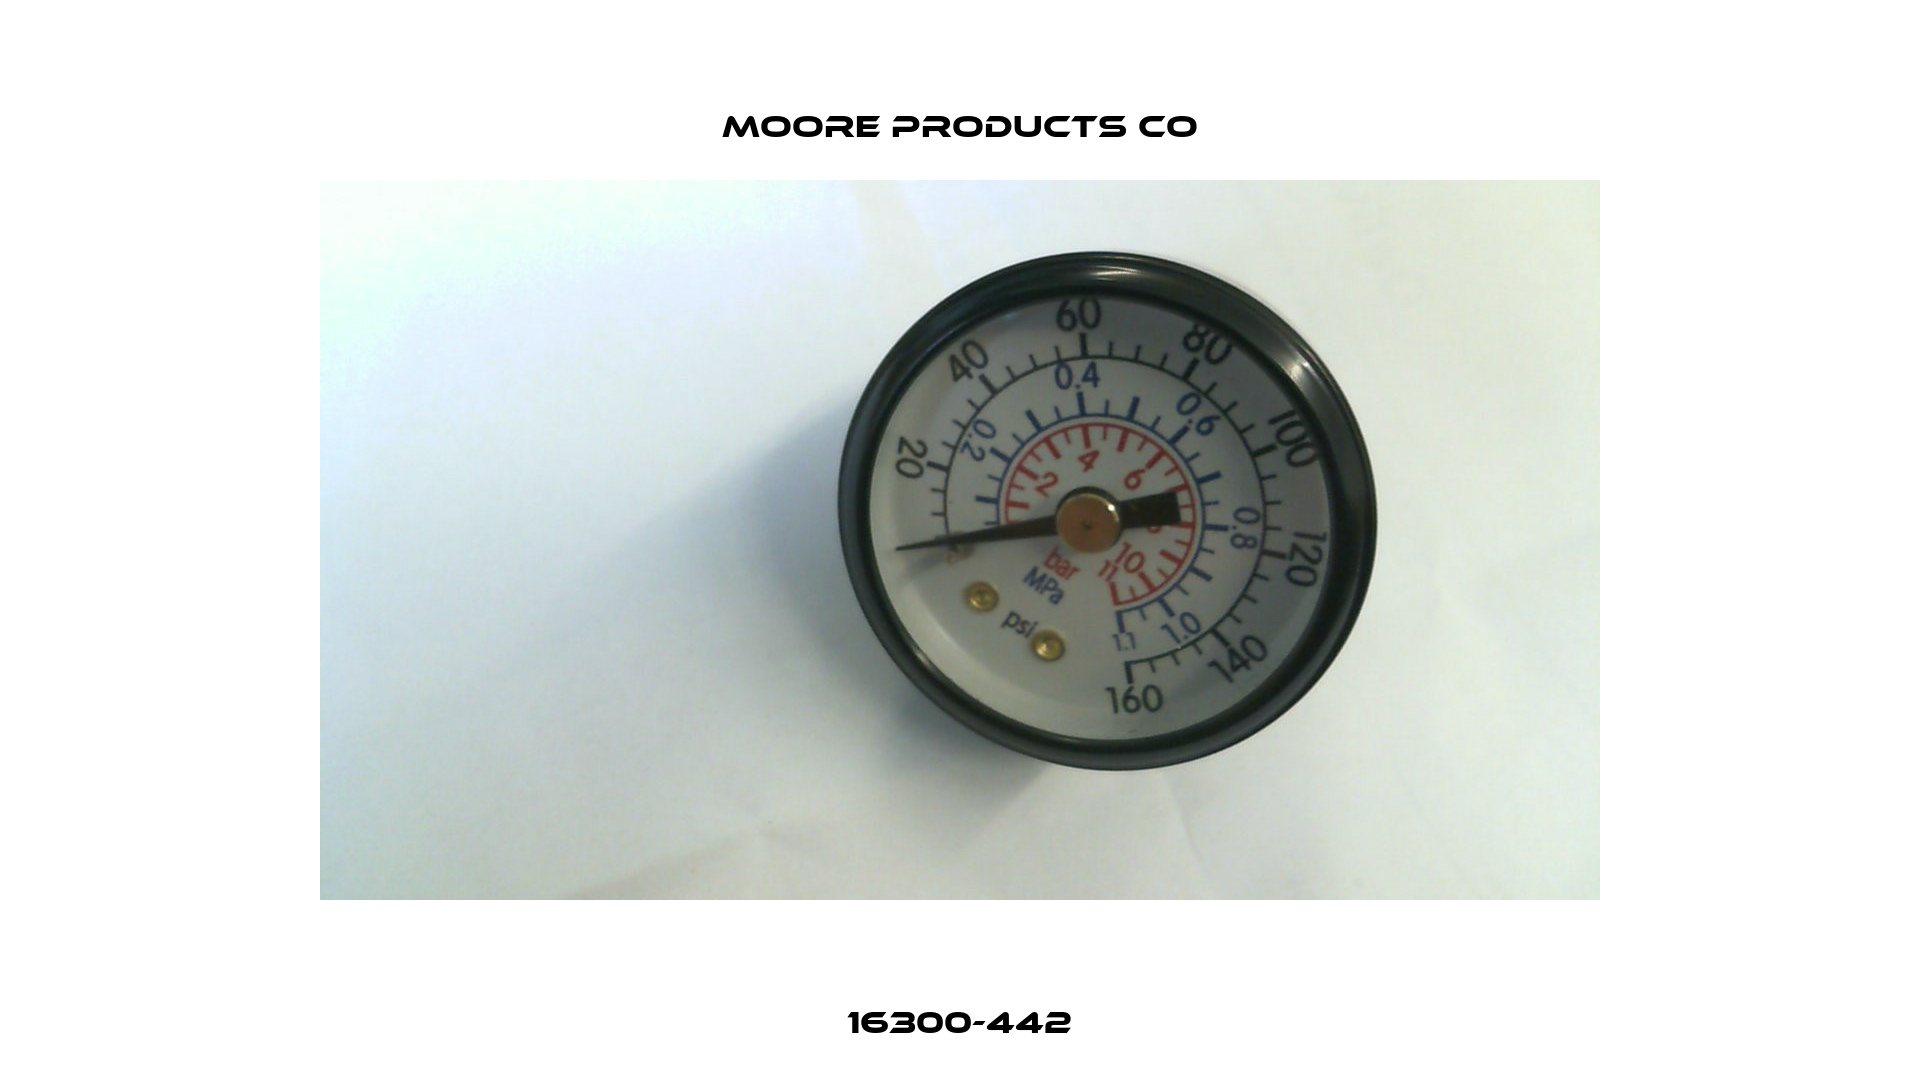 16300-442 Moore Products Co